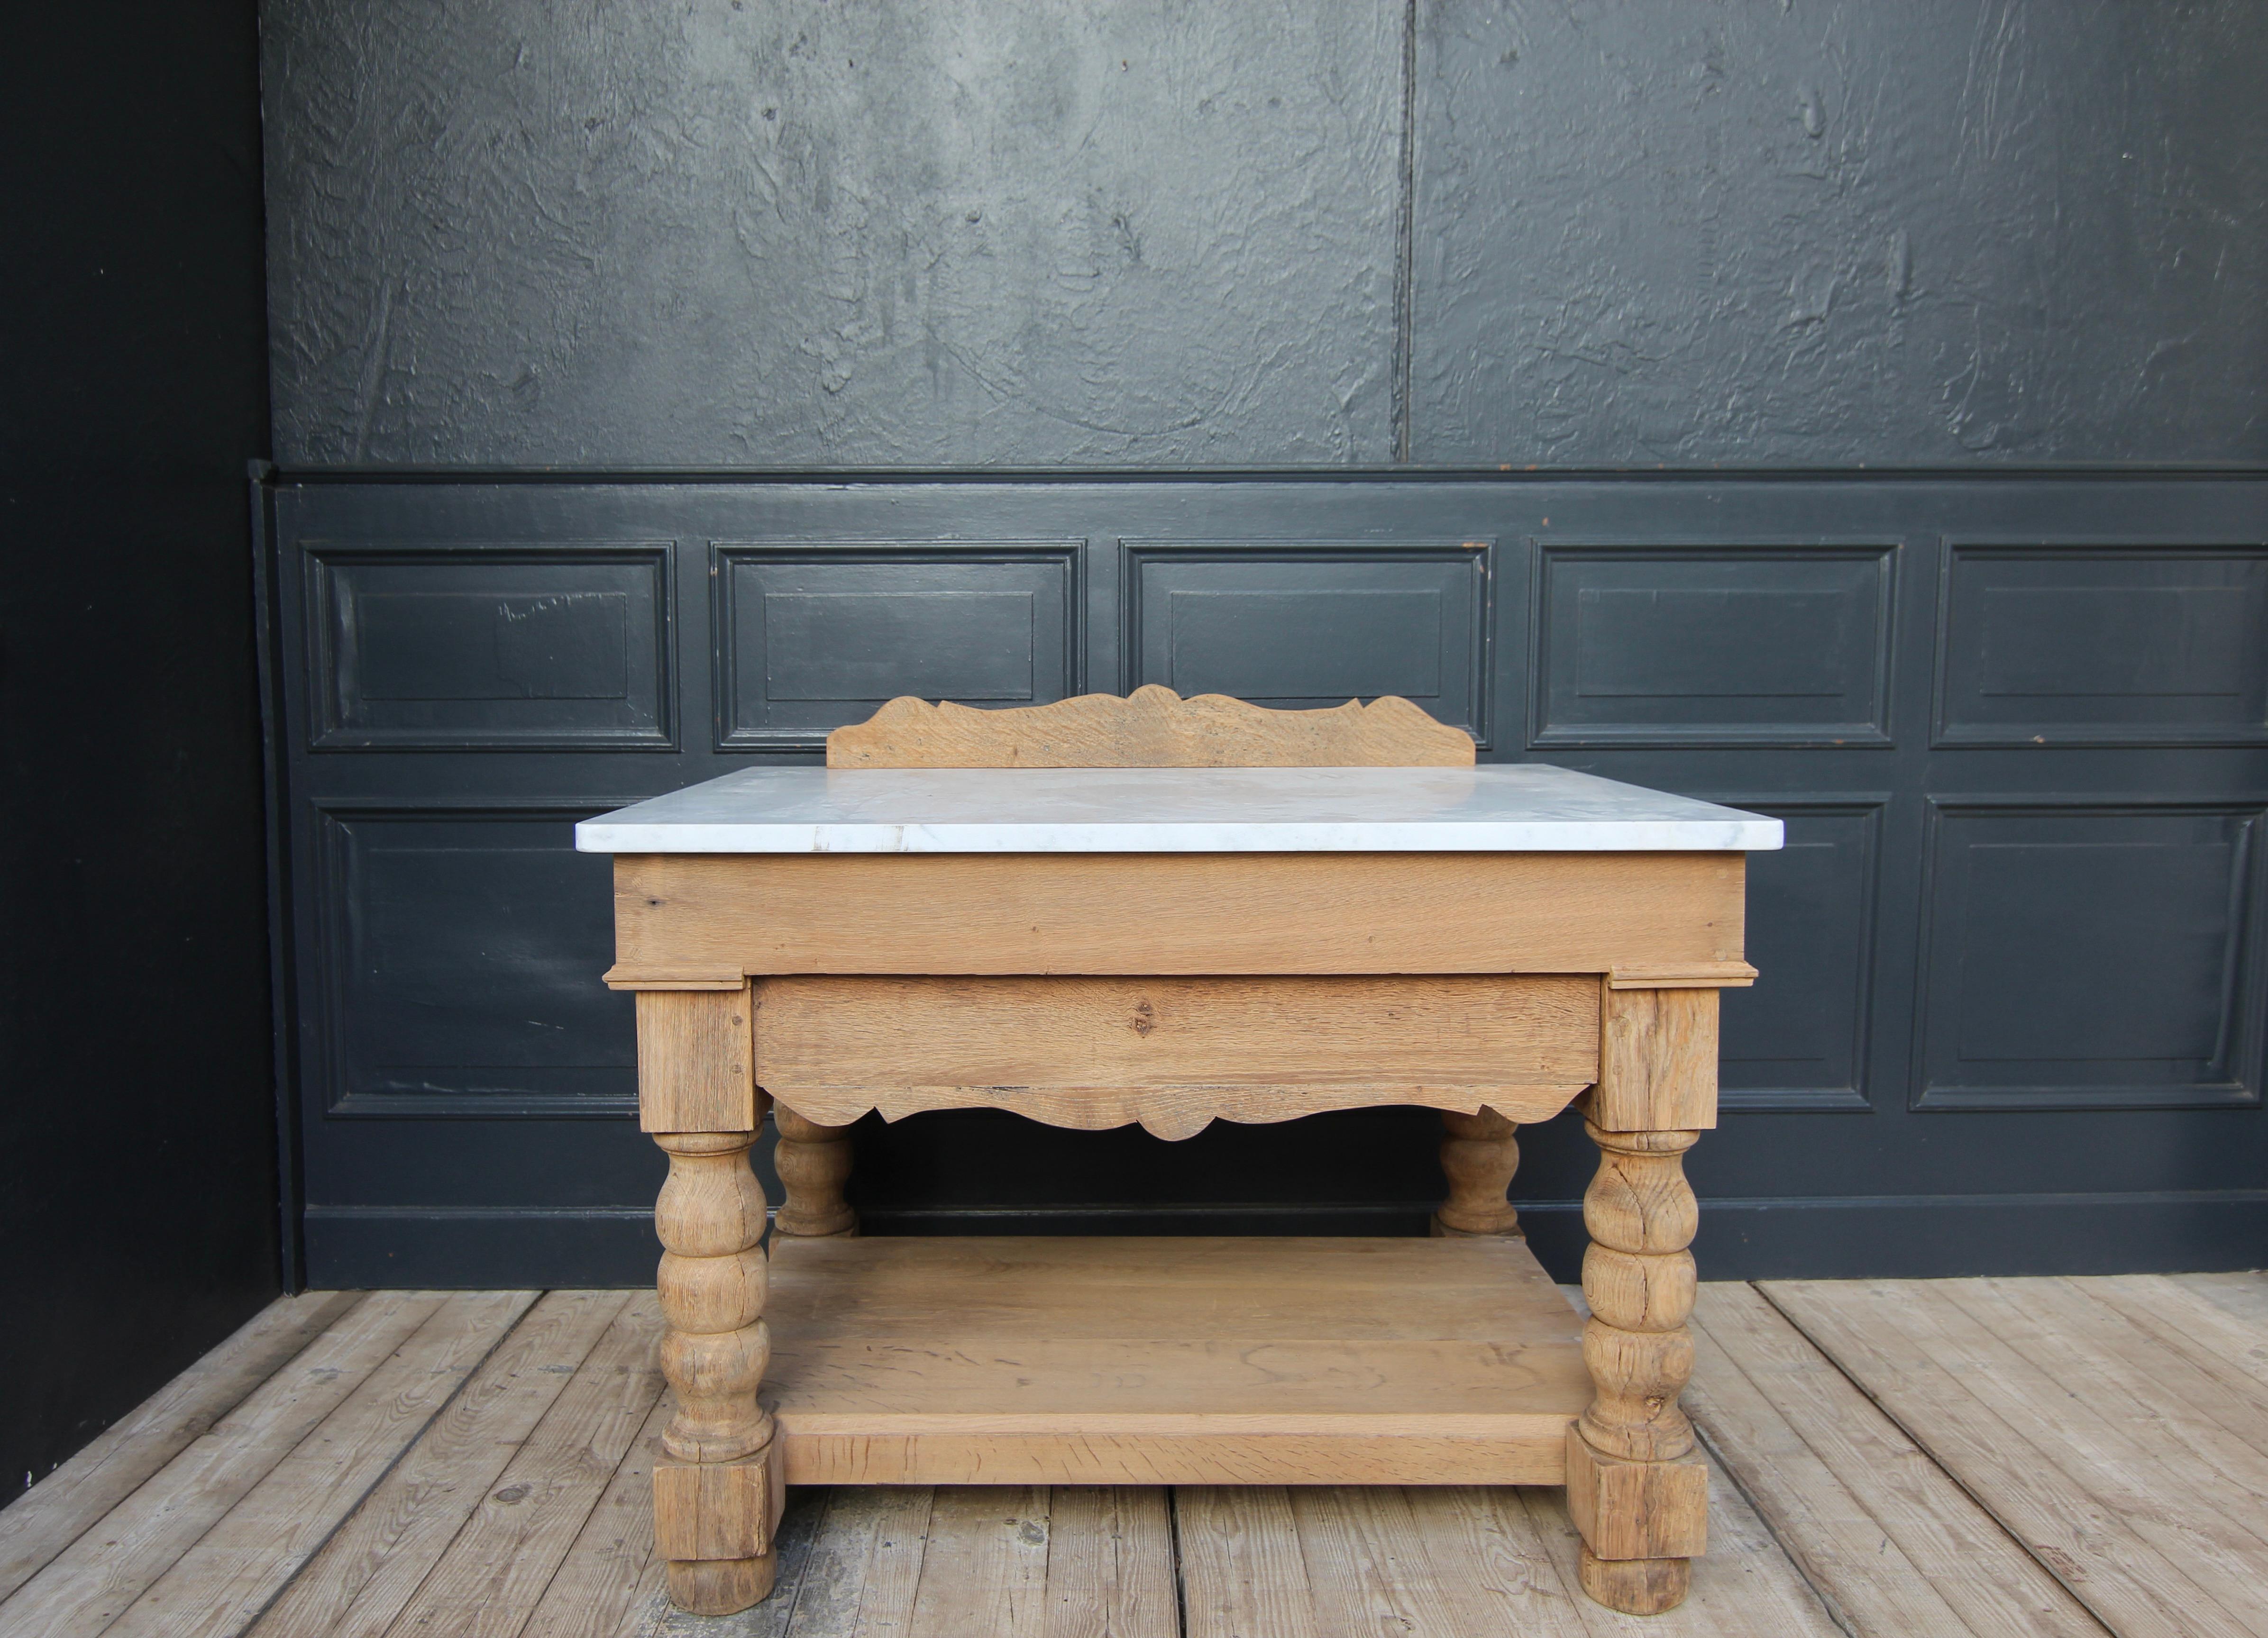 A 19th Century stripped oak table with a later added marble plate. Perfect as a kitchen worktable or kitchen island. 

Consisting of an old oak frame and a top made of Carrara marble. In the rectangular table frame with strong turned legs and high